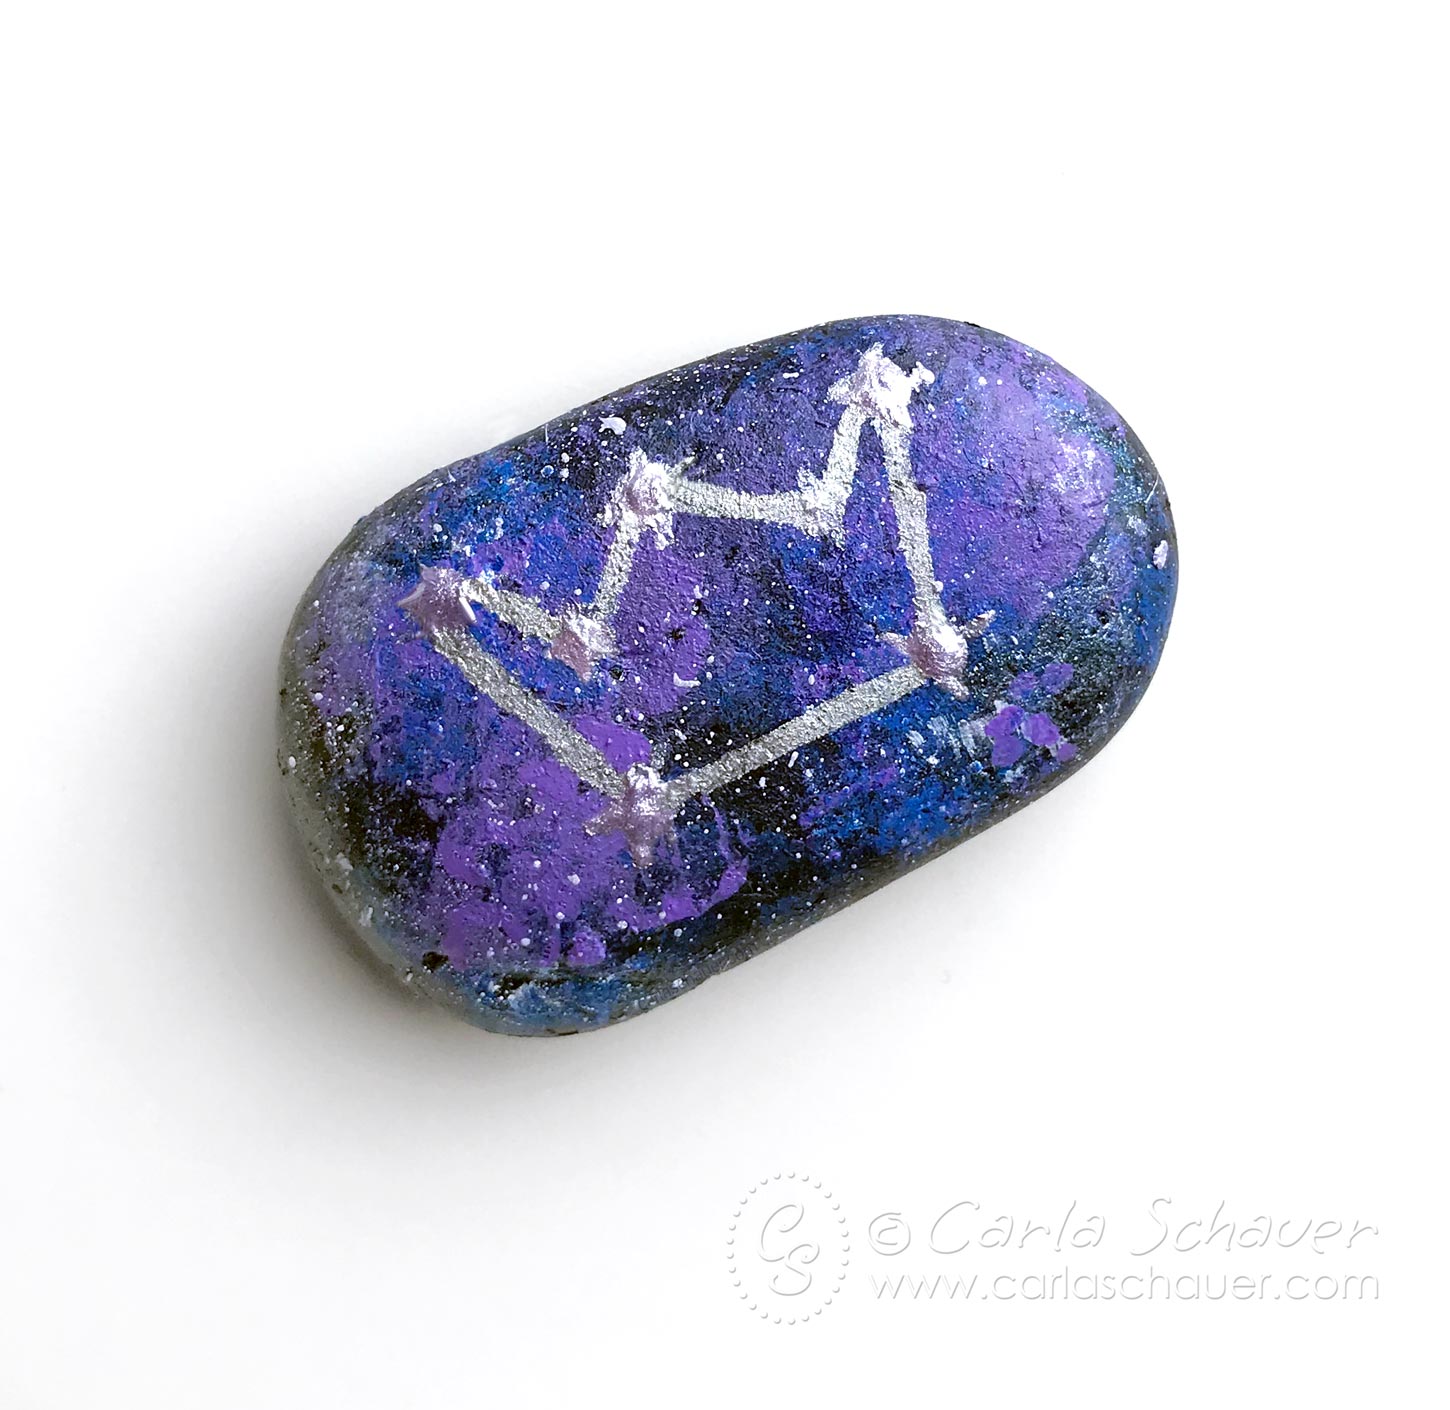 Rock painted with blue and purple paint to look like a galaxy, with silver crown constellation.